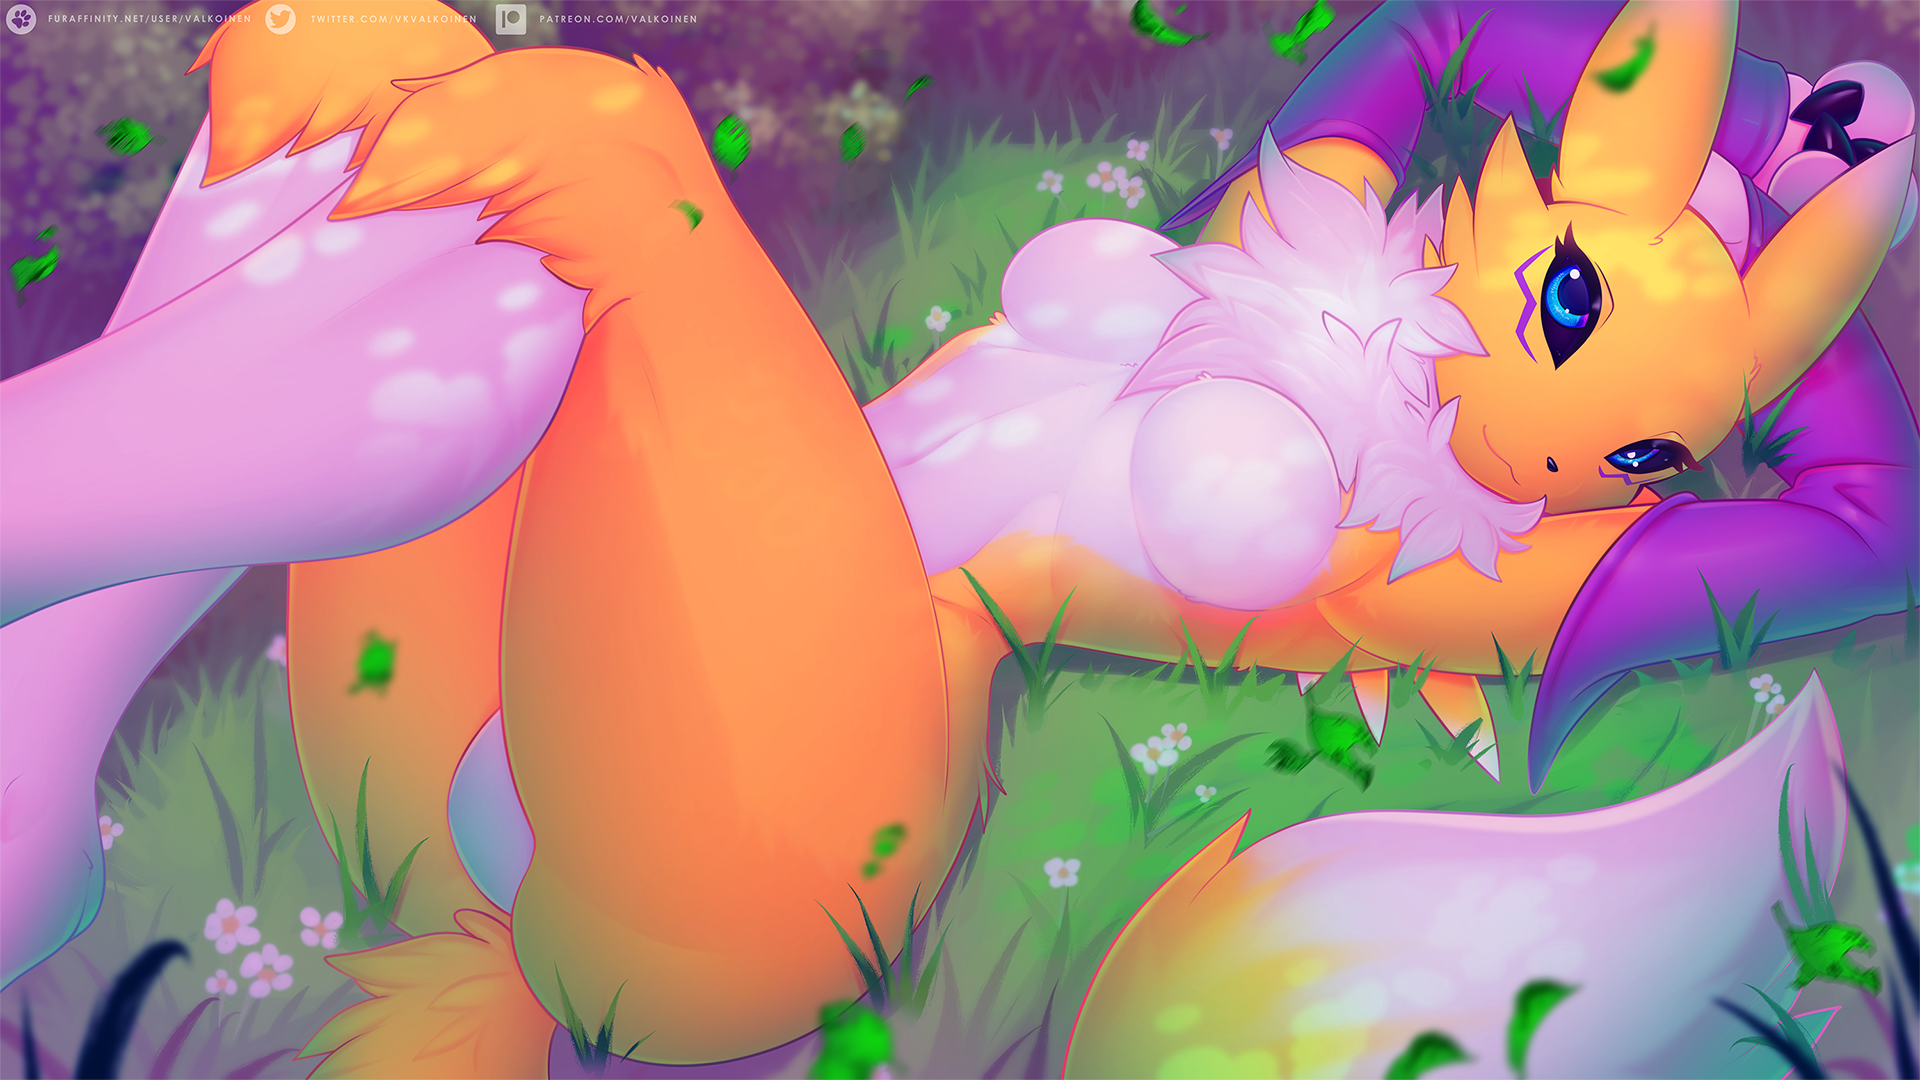 Anime 1920x1080 Valkoinen Renamon Digimon furry furry girls forest blue eyes Anthro watermarked fur lying down lying on back grass flowers leaves armpits claws